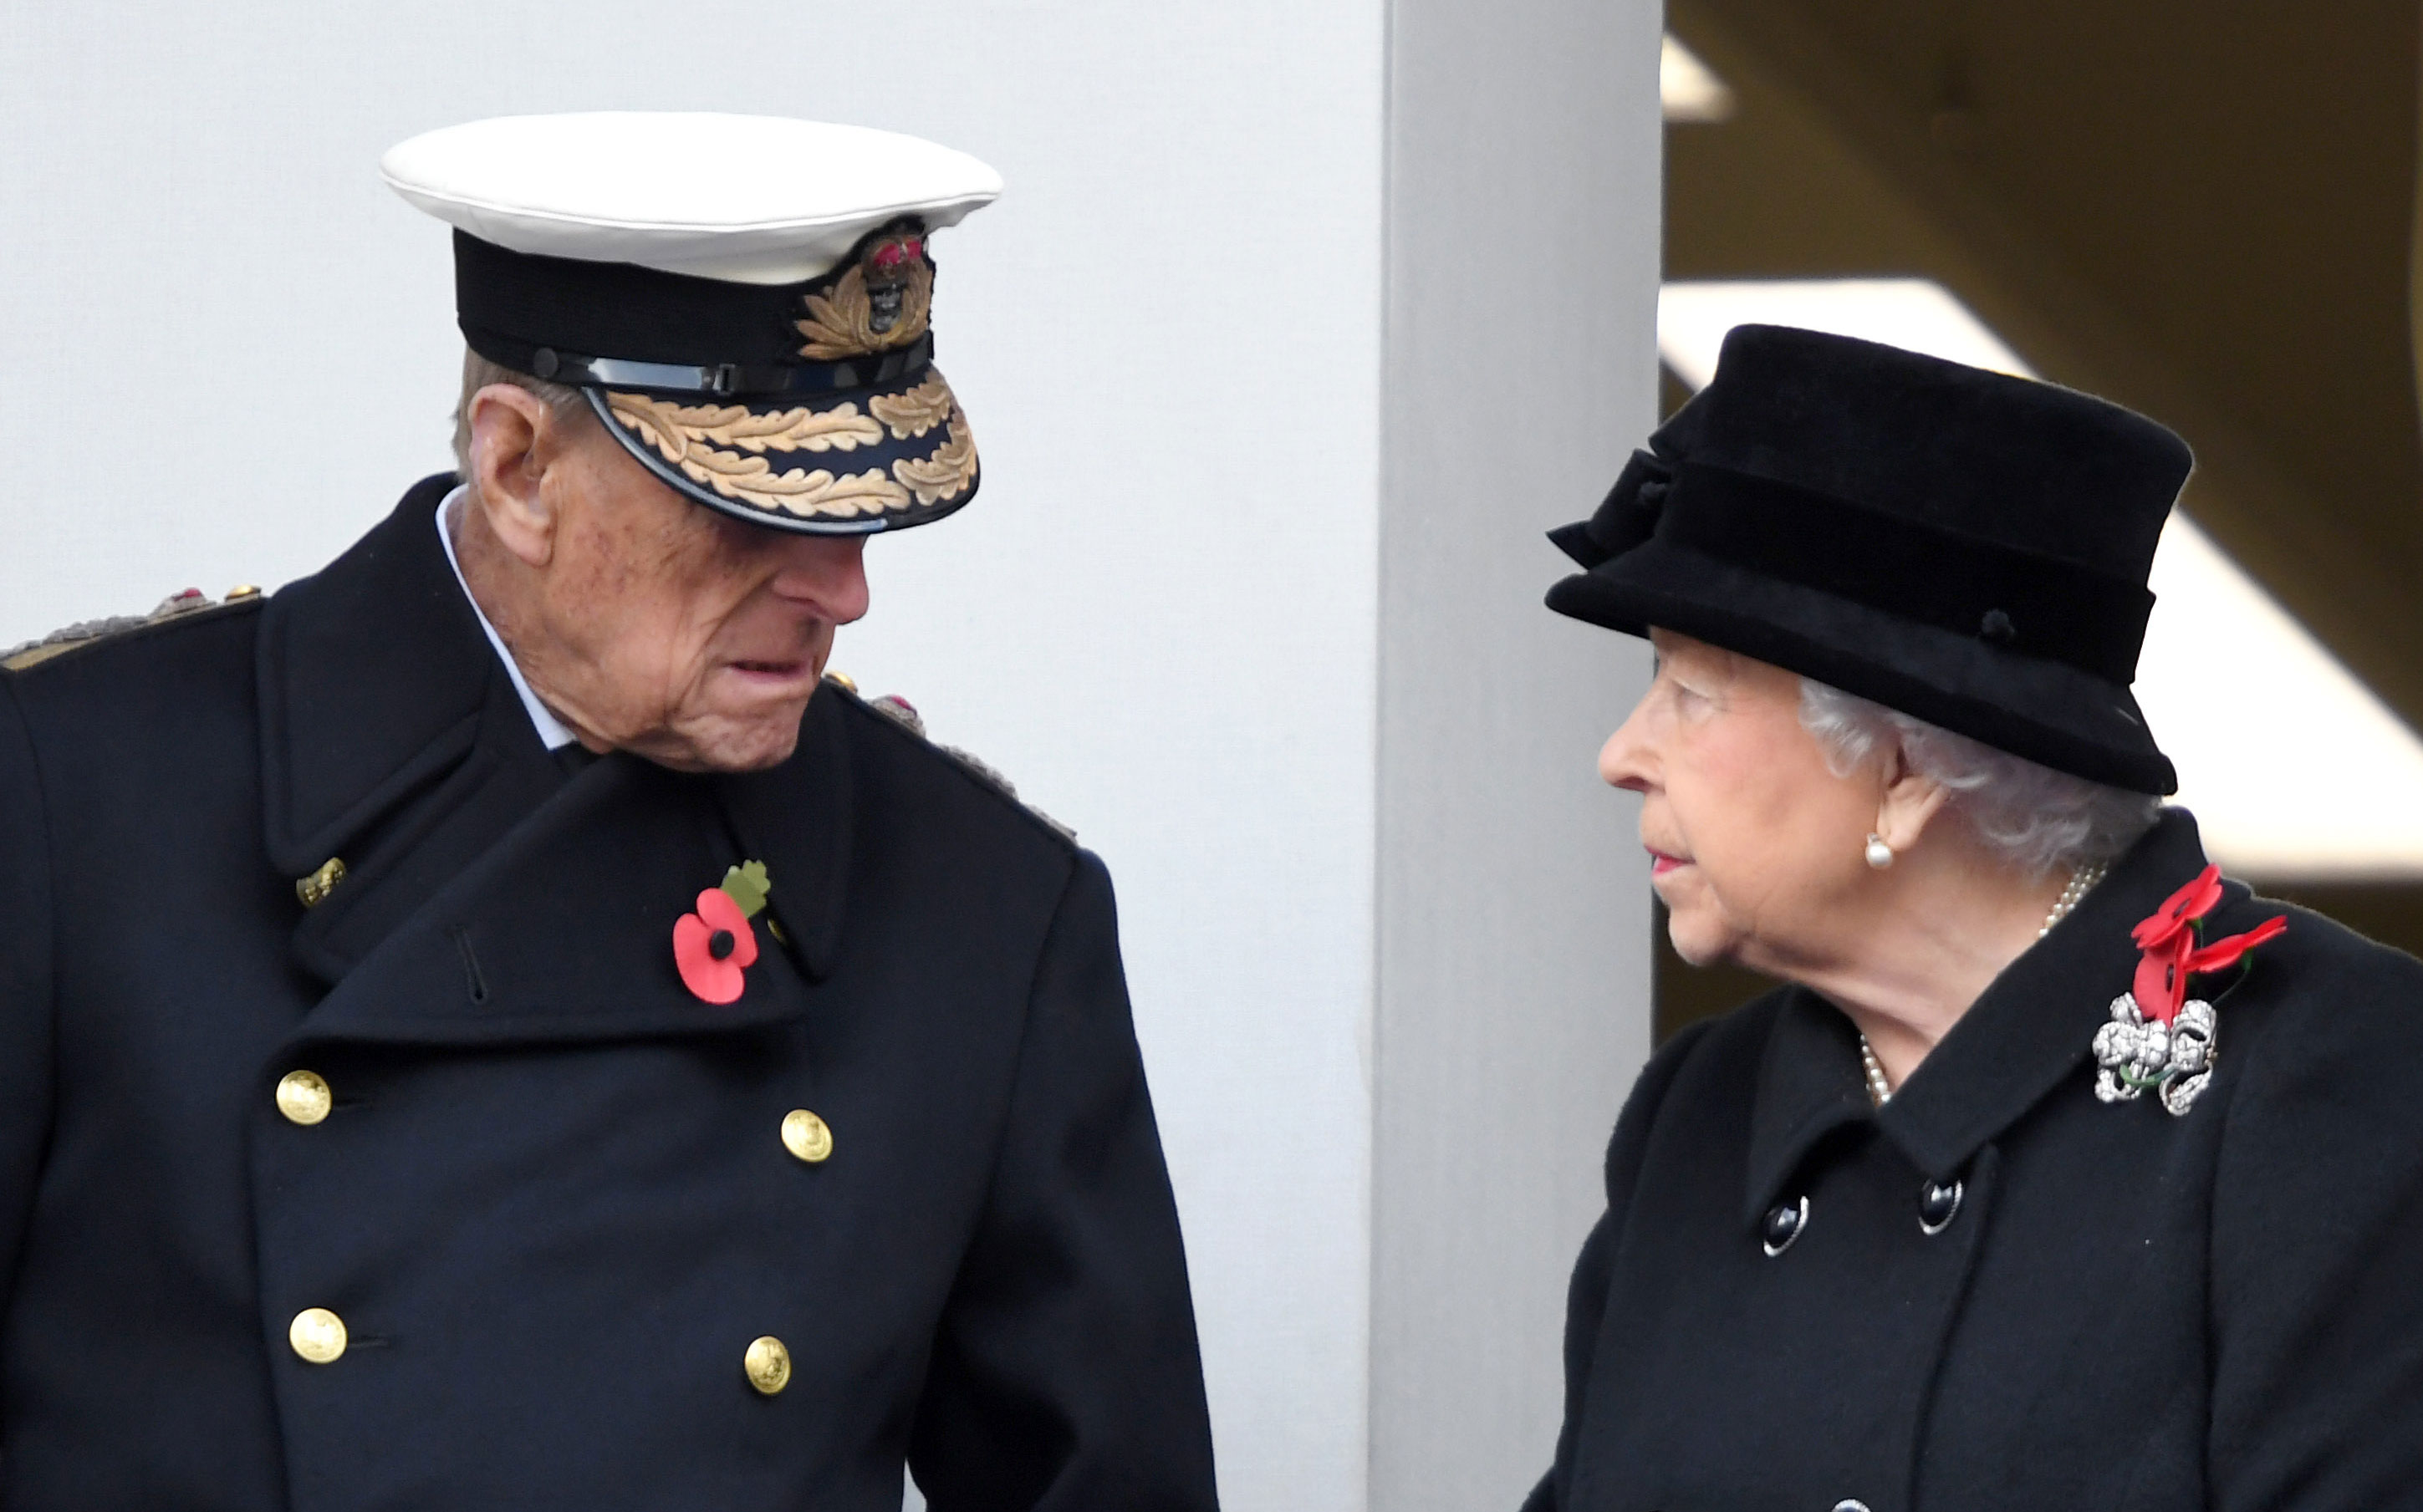 Prince Philip Rings In The New Year With Off-Colour ‘Terrorist’ Joke